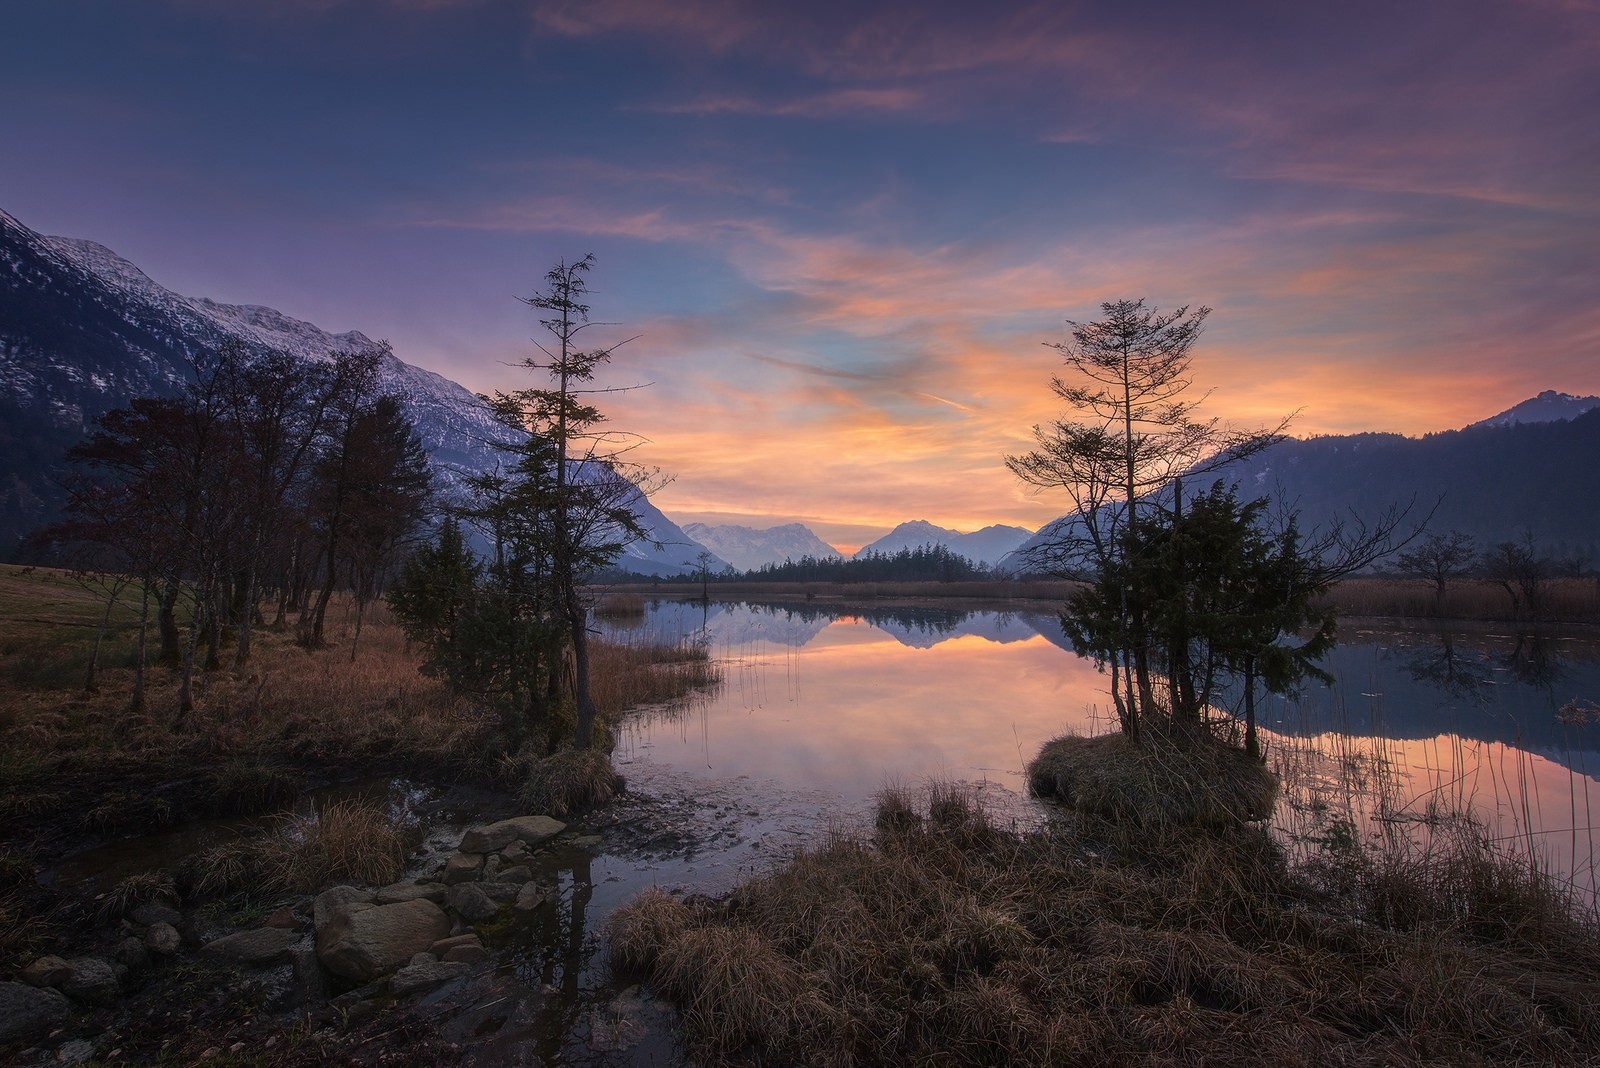 General 1600x1068 nature photography landscape lake sunset mountains trees snow reflection dry grass calm Germany